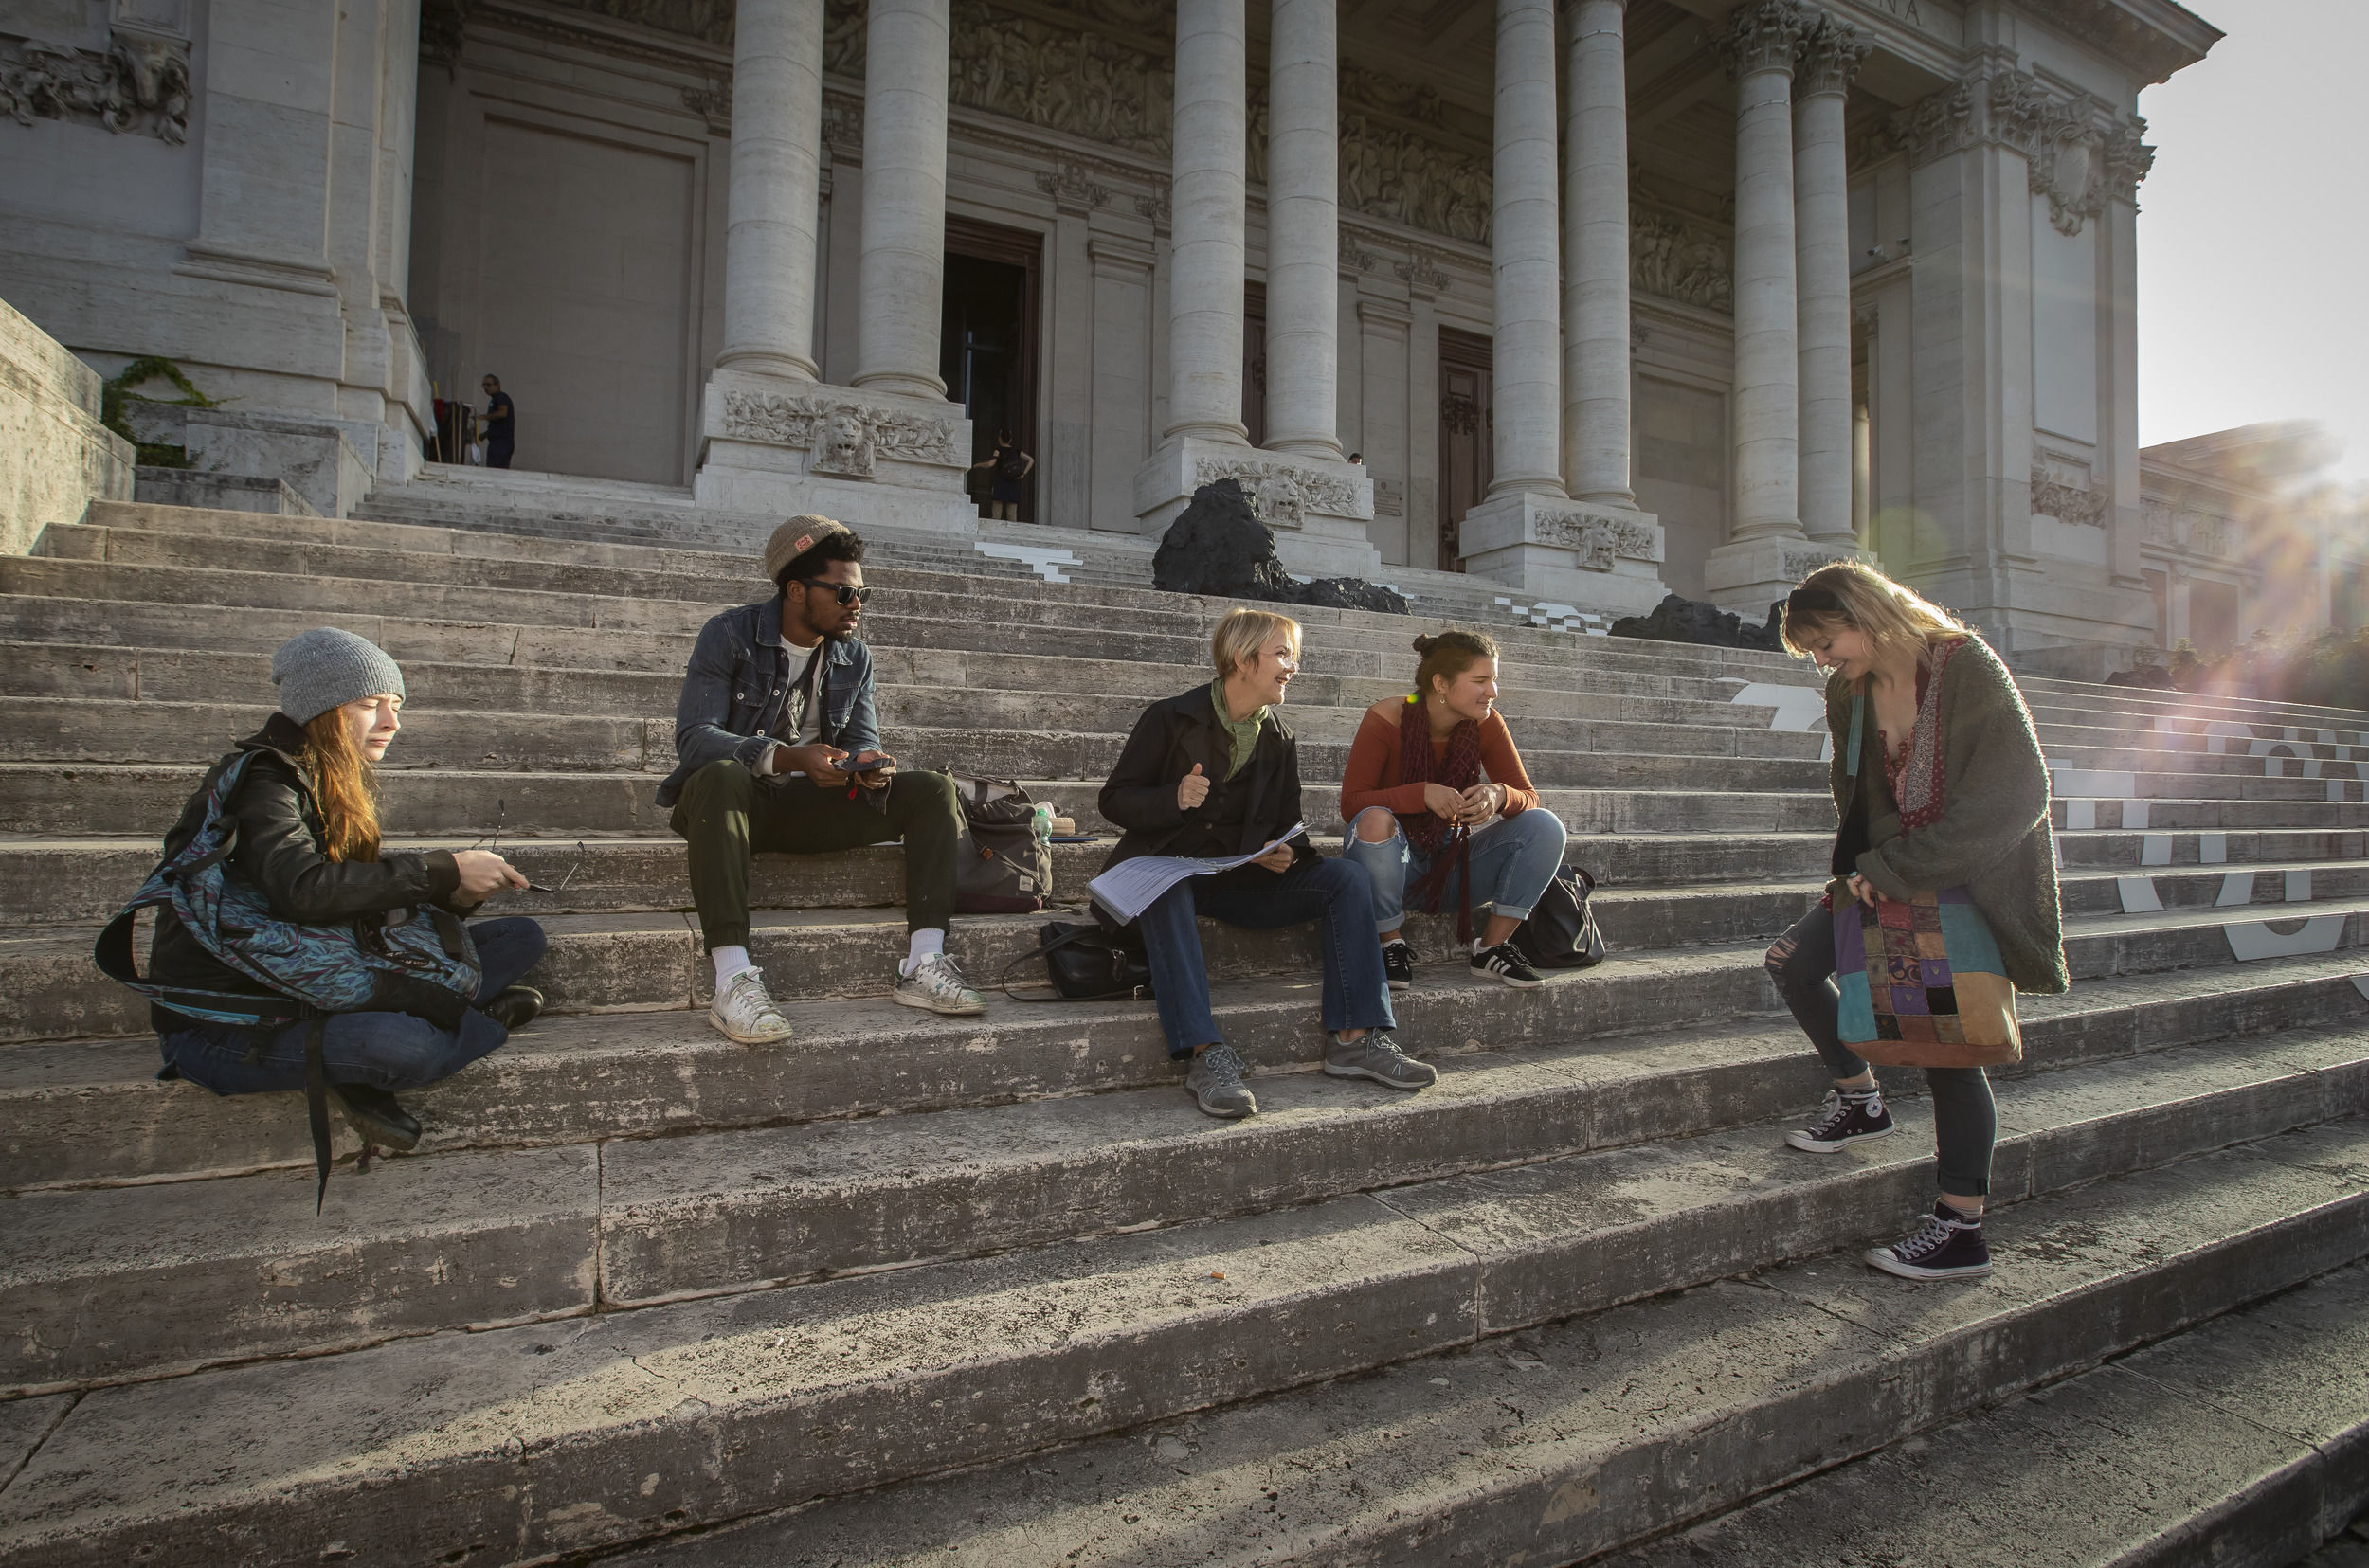 Art students creating sketches on museum steps.